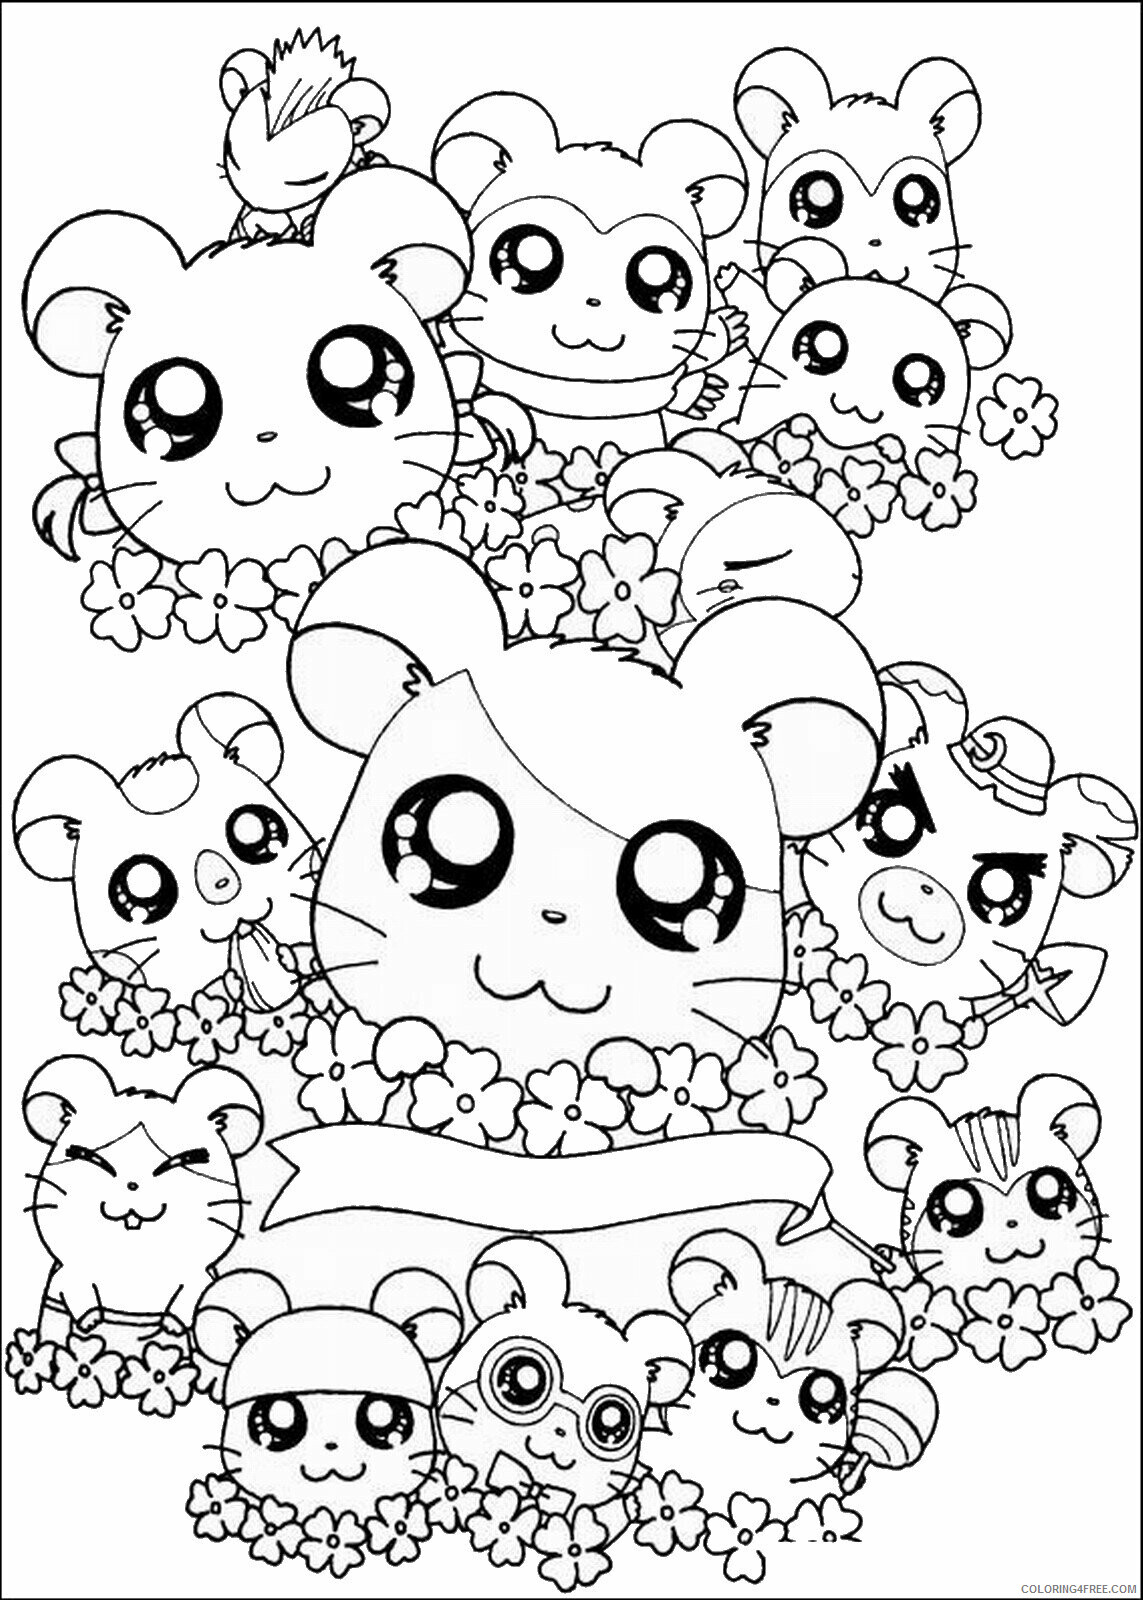 Hamtaro Printable Coloring Pages Anime hamtaro_coloring9 2021 0546 Coloring4free